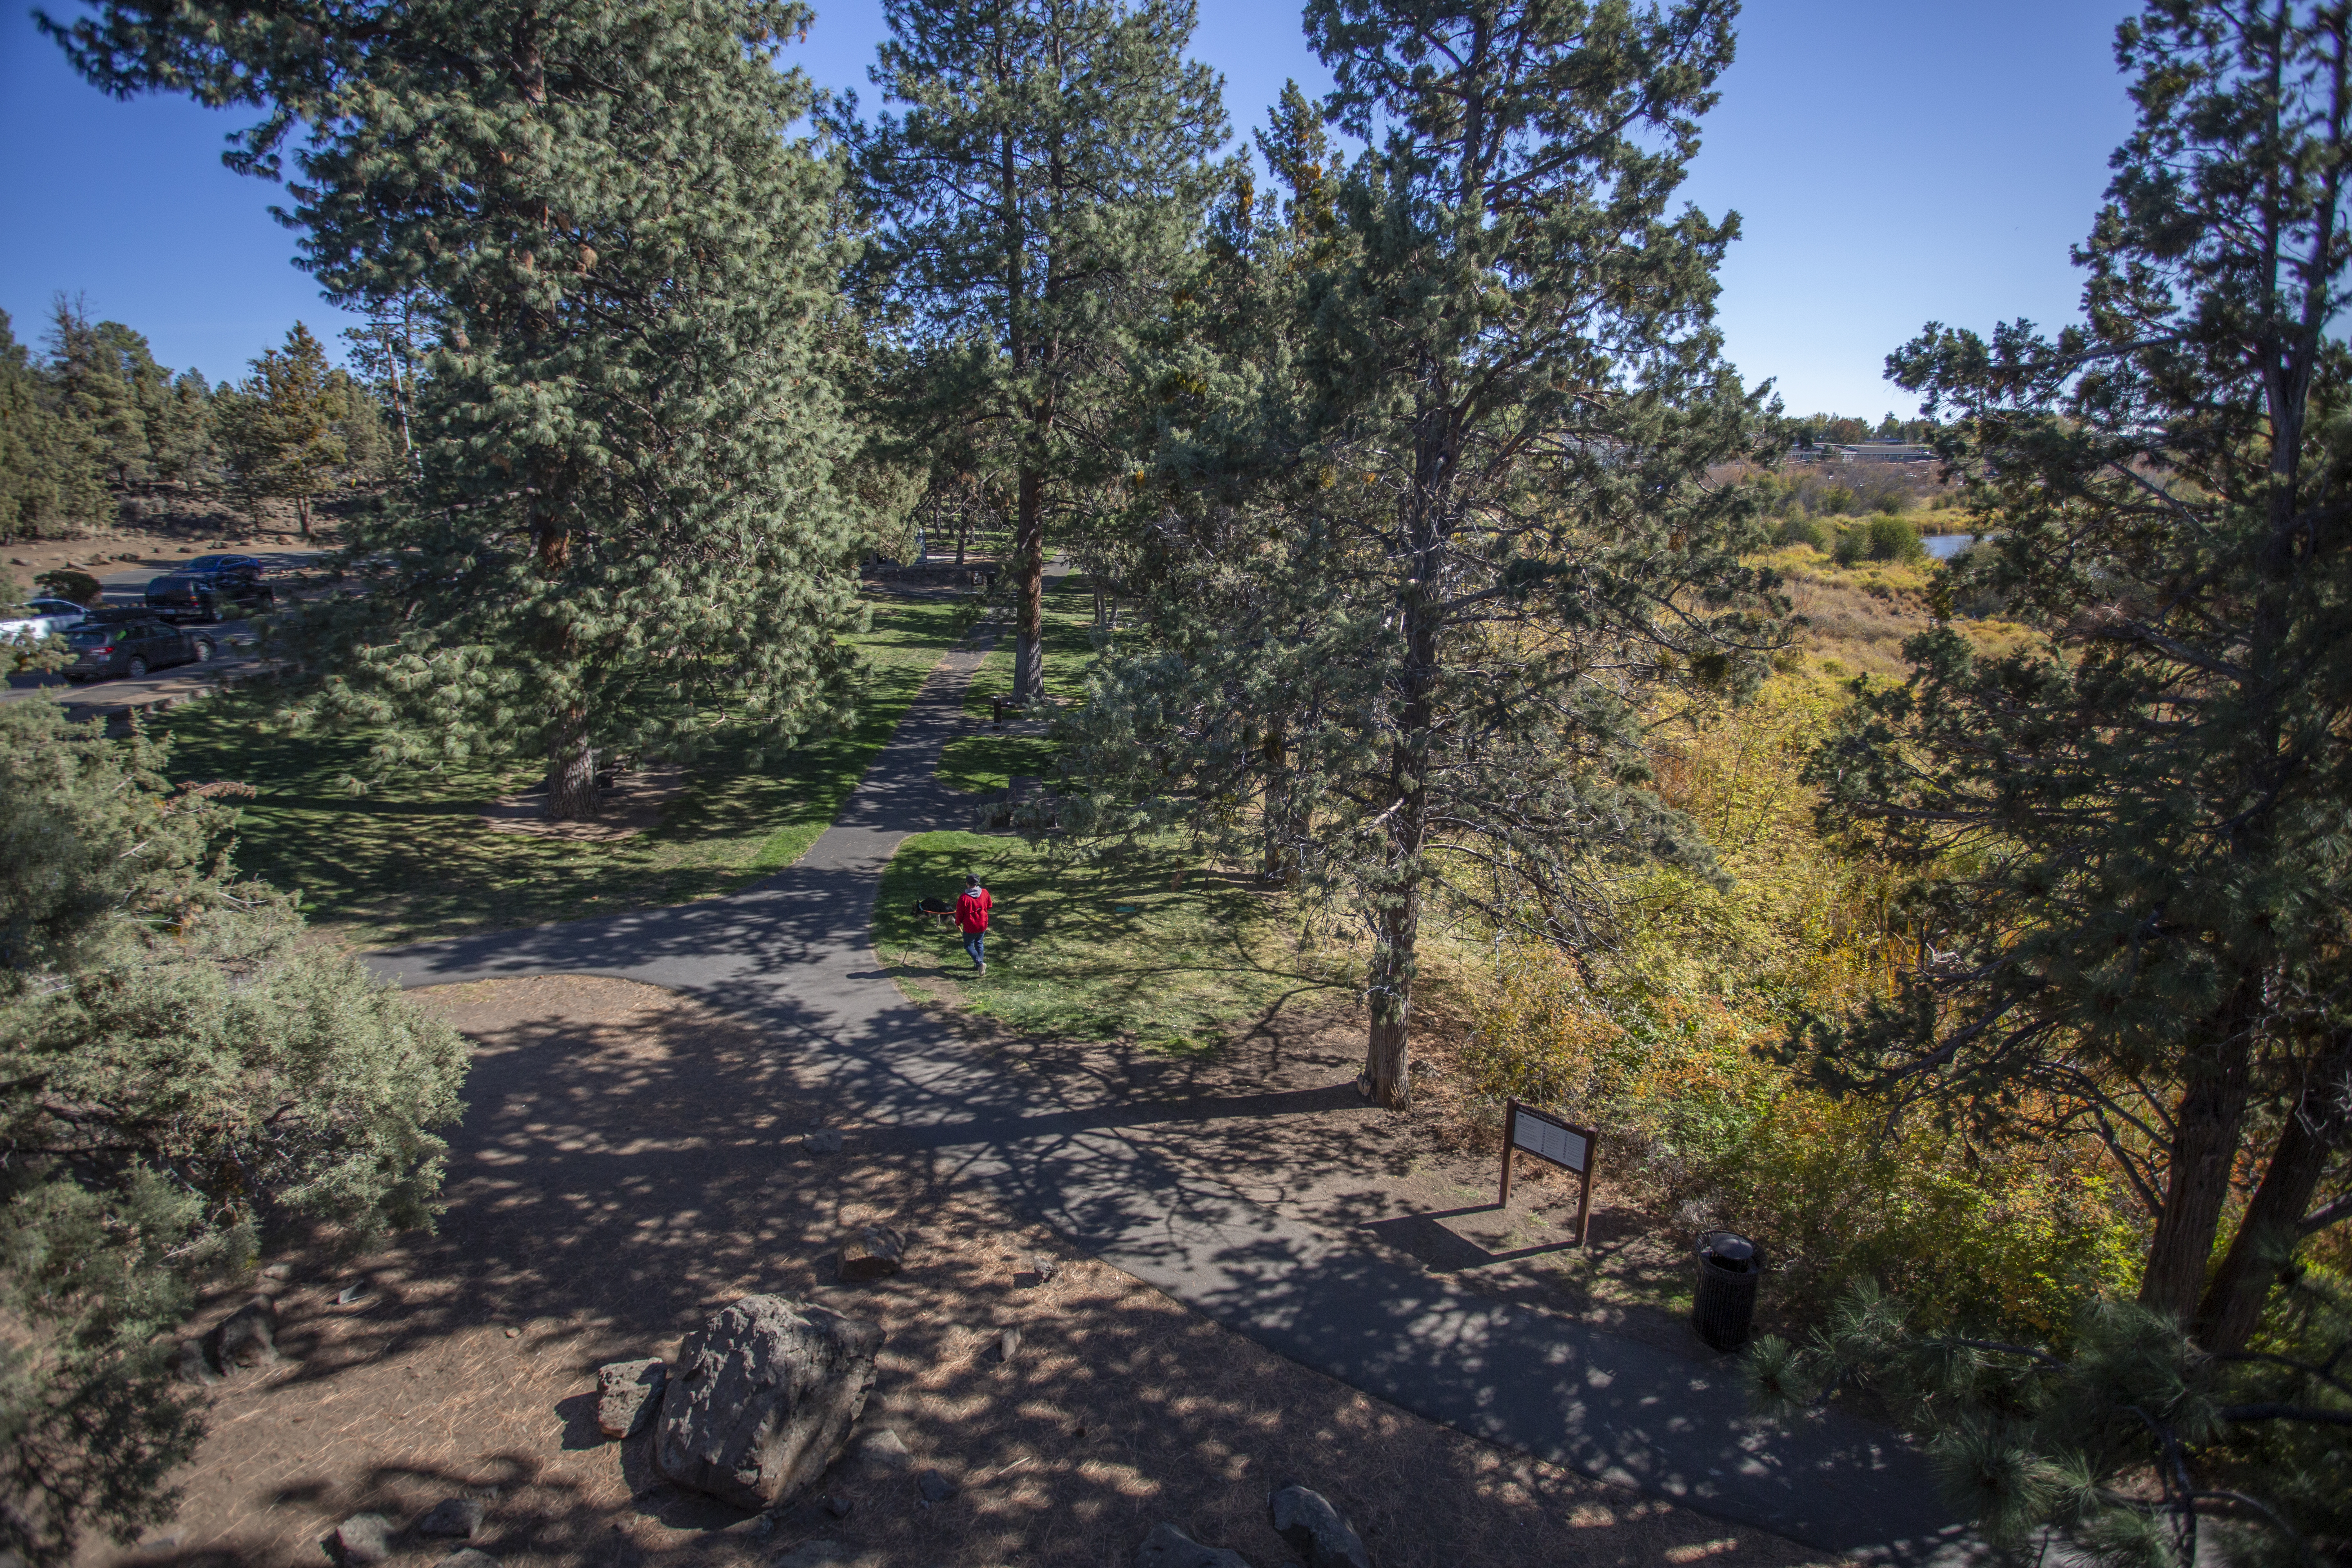 A view of the Sawyer Park trail in the grassy area